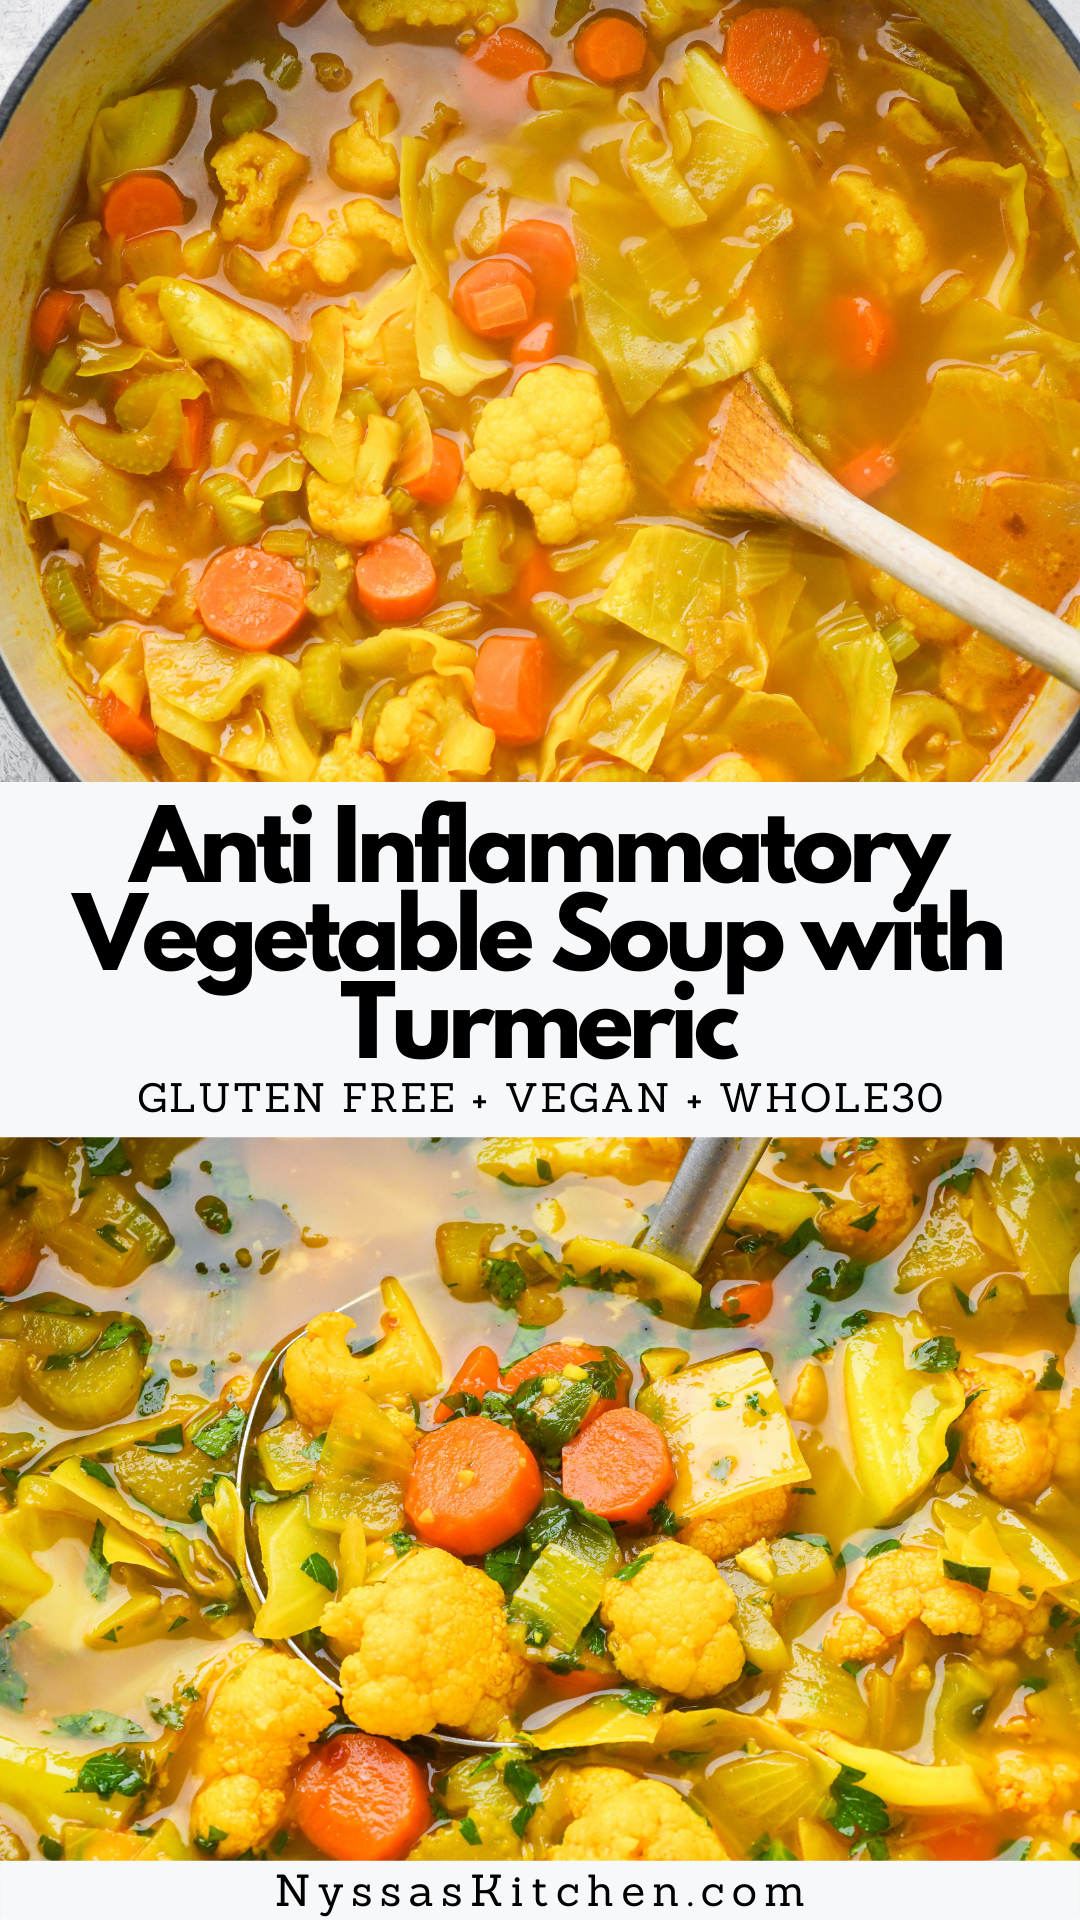 Warm up with this anti inflammatory vegetable soup with turmeric! Made with nutrient dense ingredients like olive oil, onions, carrots, celery, cabbage, cauliflower, turmeric, and vegetable broth, this healthy soup will keep you feeling your best all winter long. Vegan, gluten free, paleo, and Whole30 compatible.